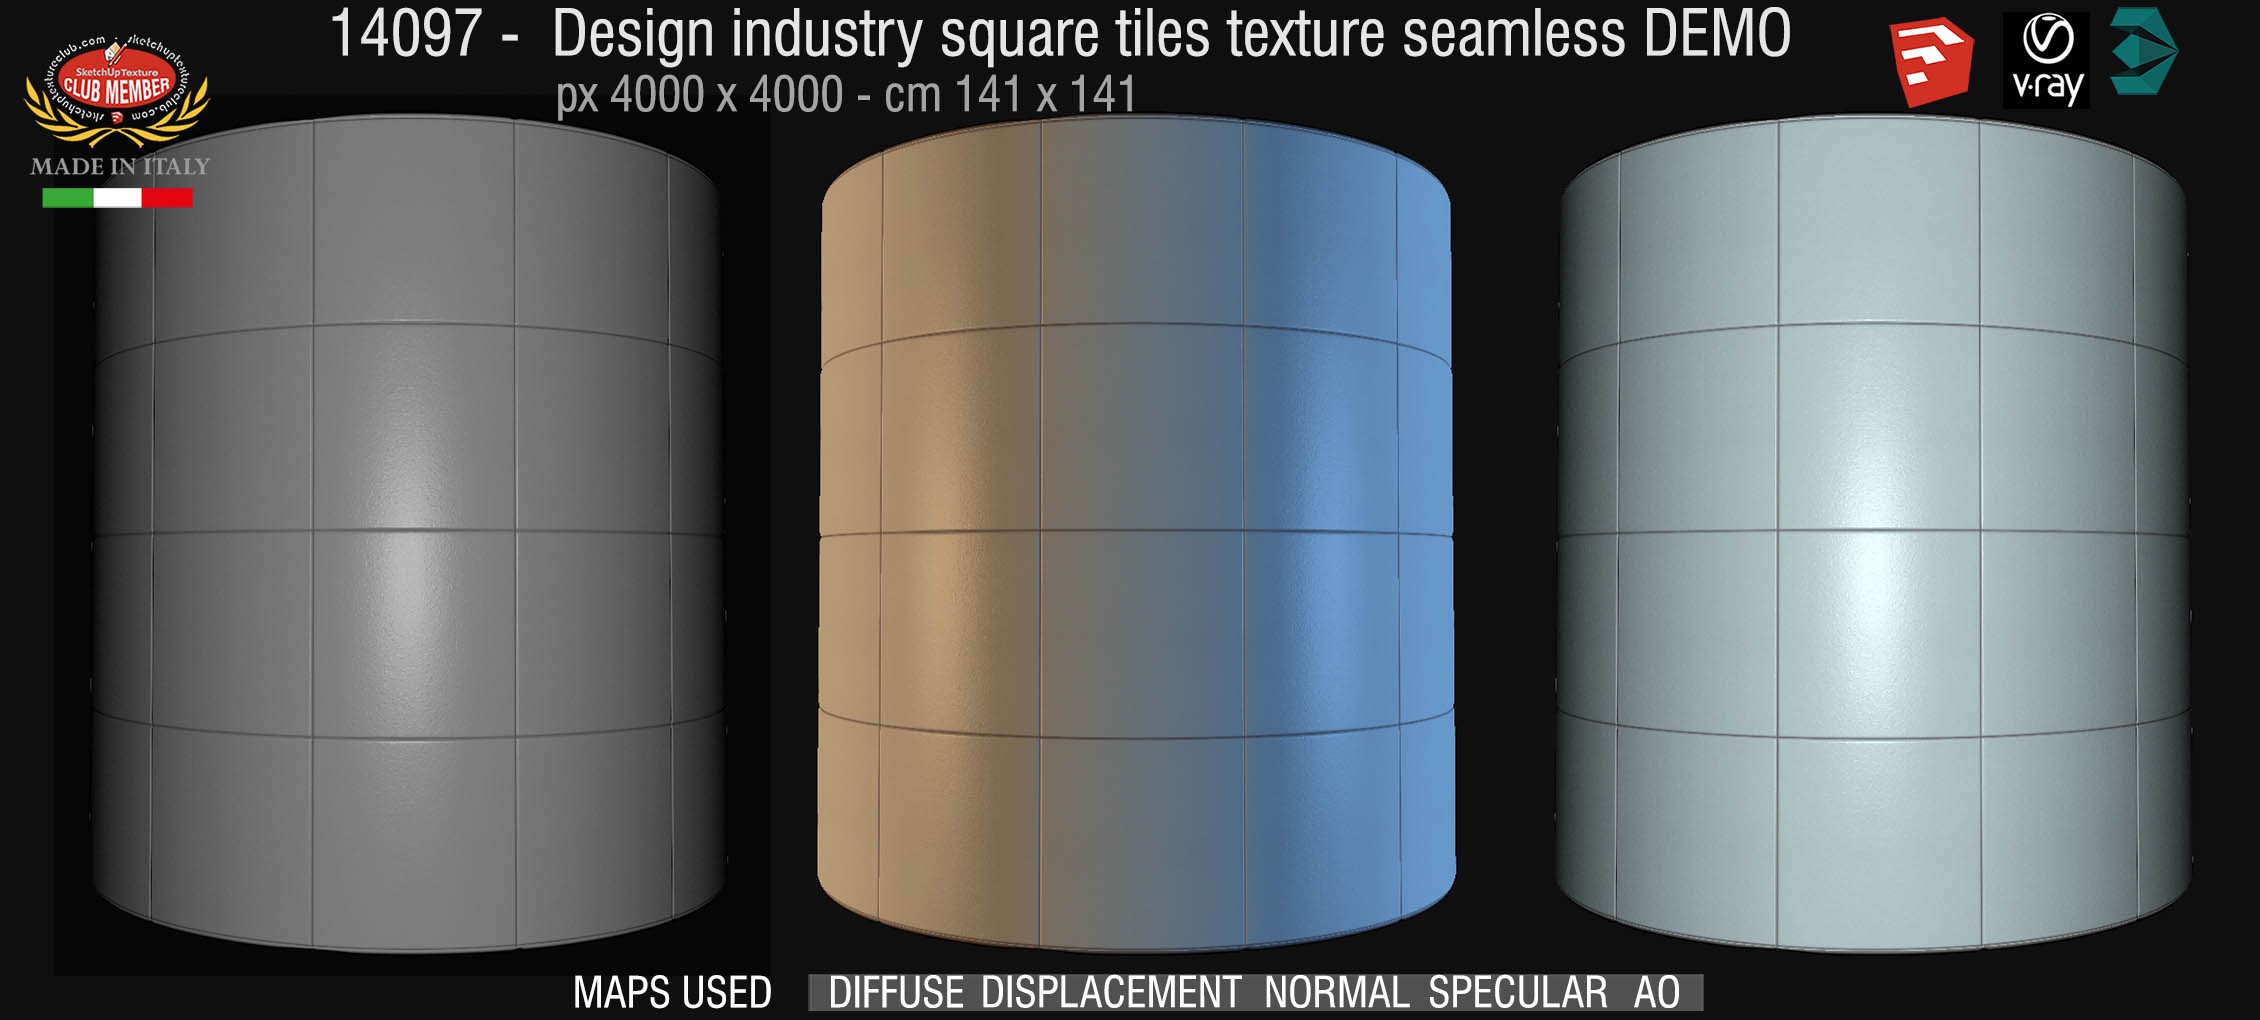 14097 Design industry square tile texture seamless + maps DEMO